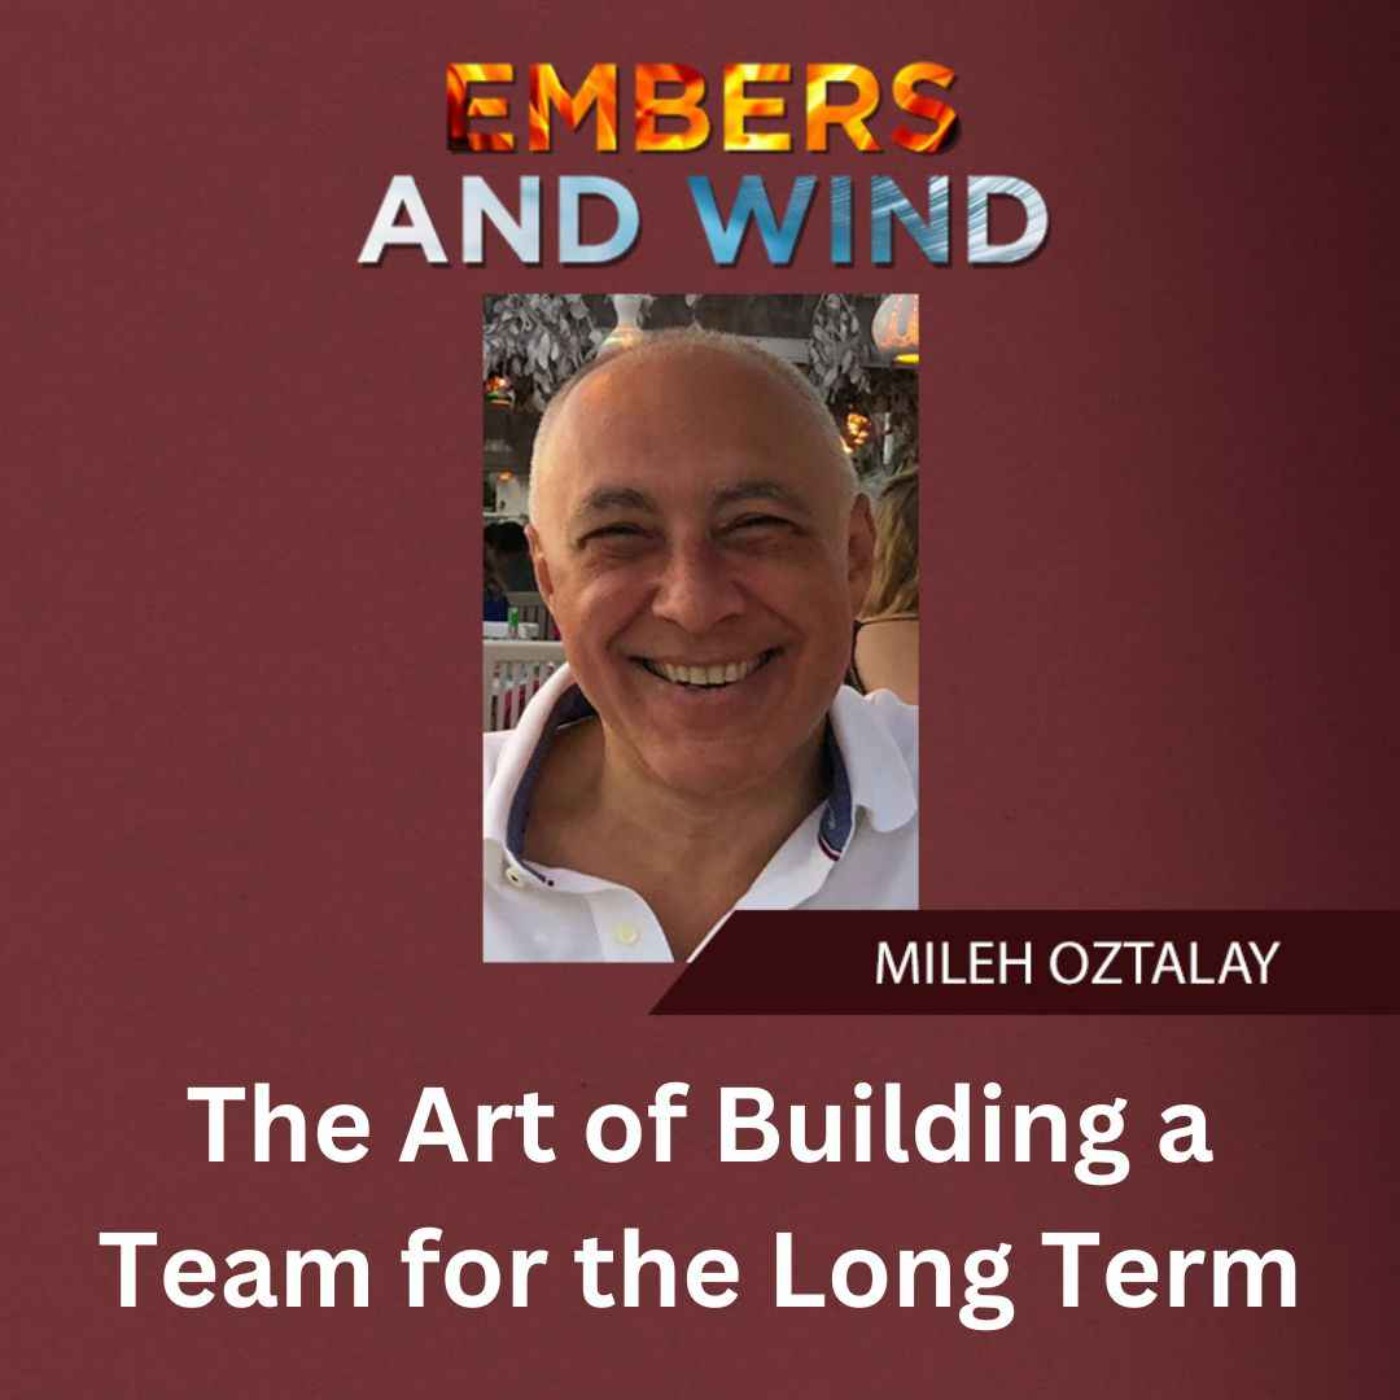 The Art of Building a Team for the Long Term